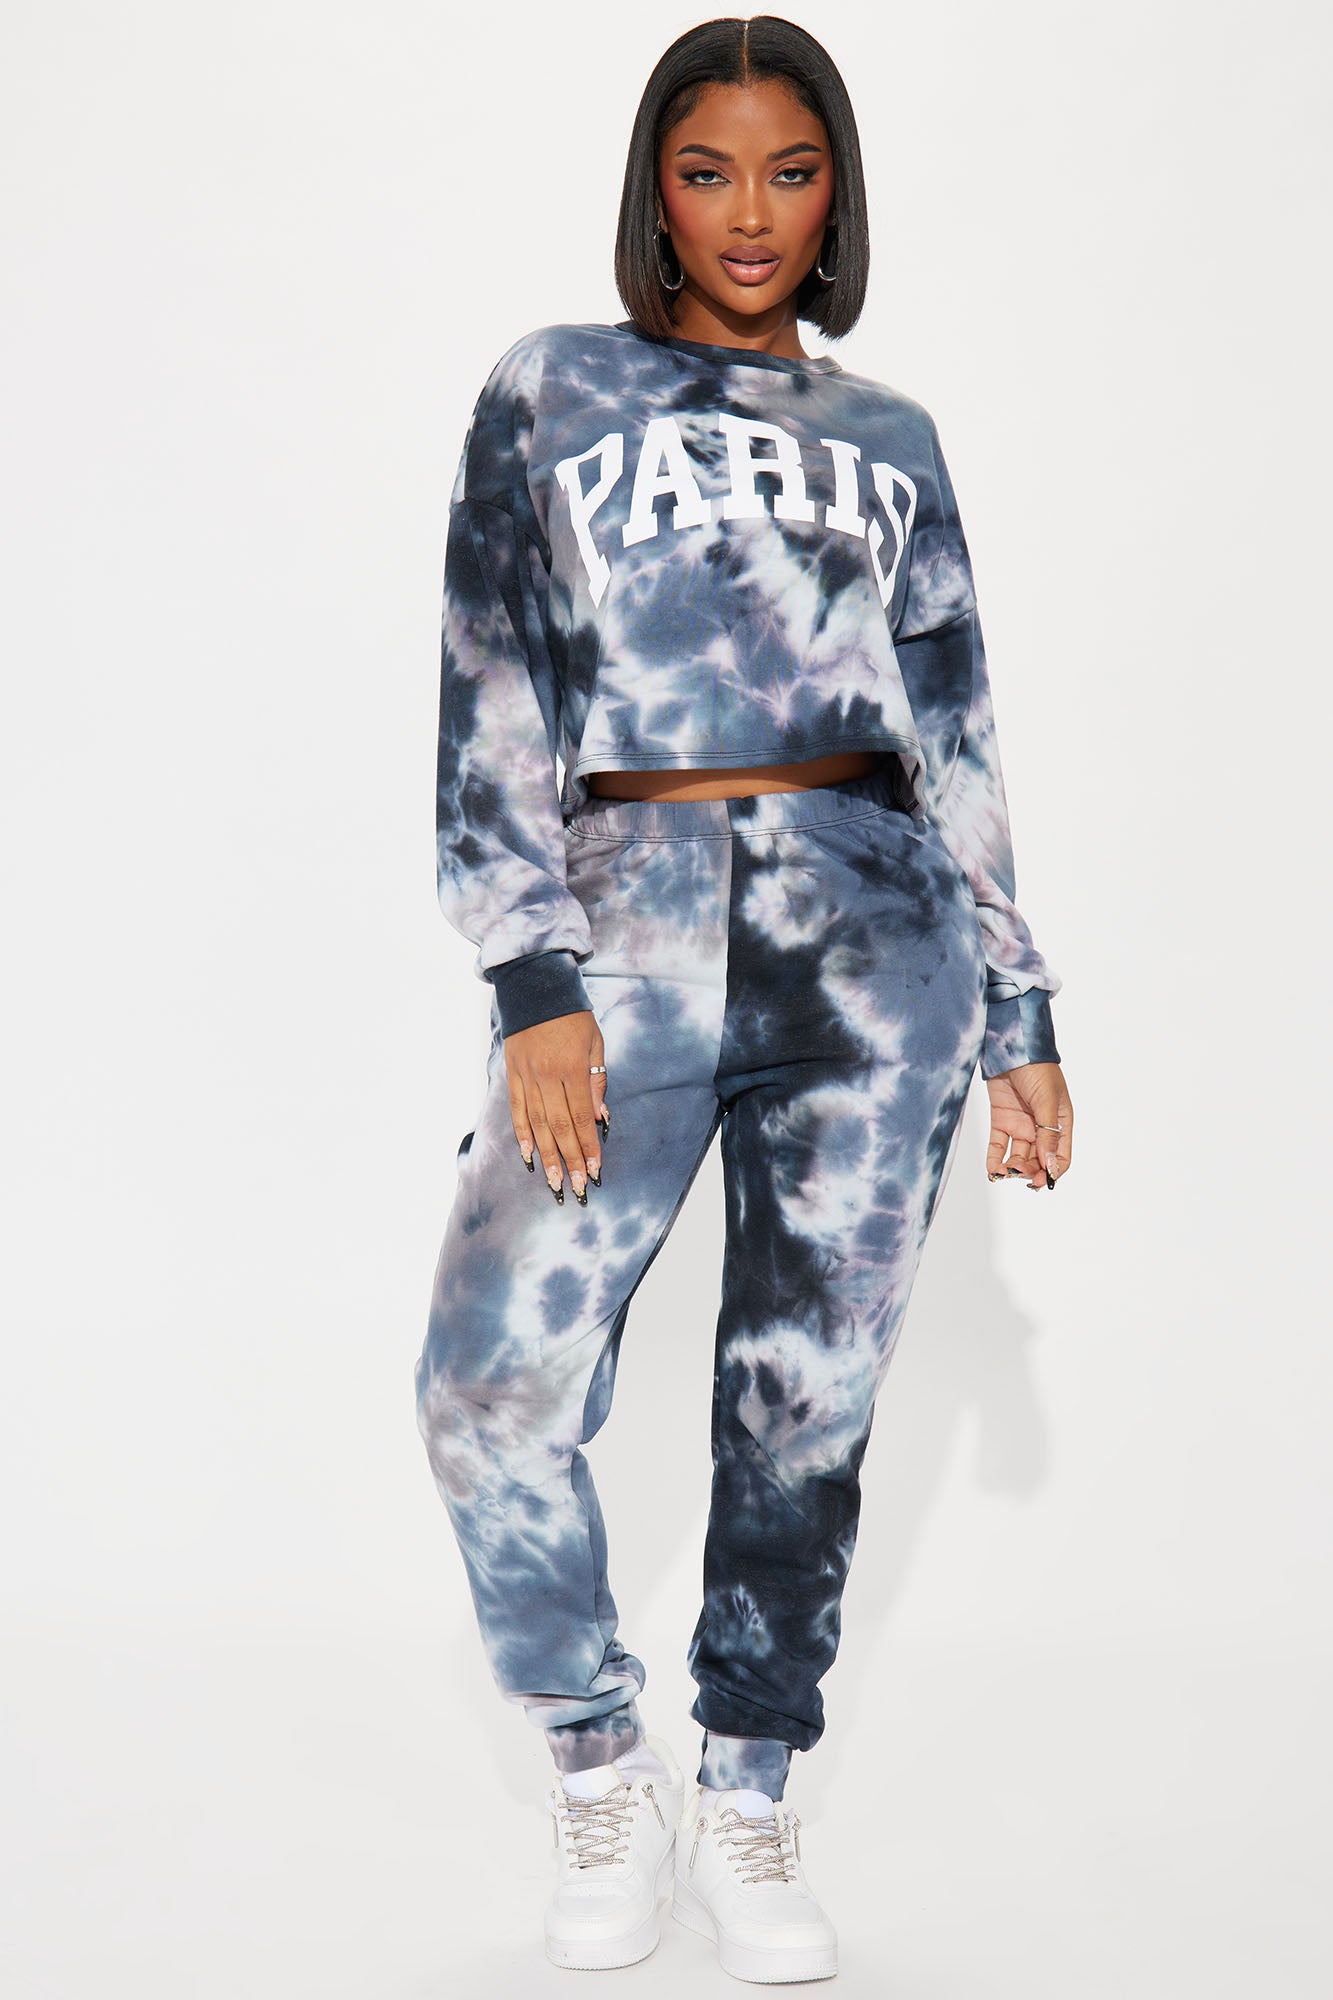 Mocha Tie Dye Jogger Set - Outfit Sets - The Calm and Collected